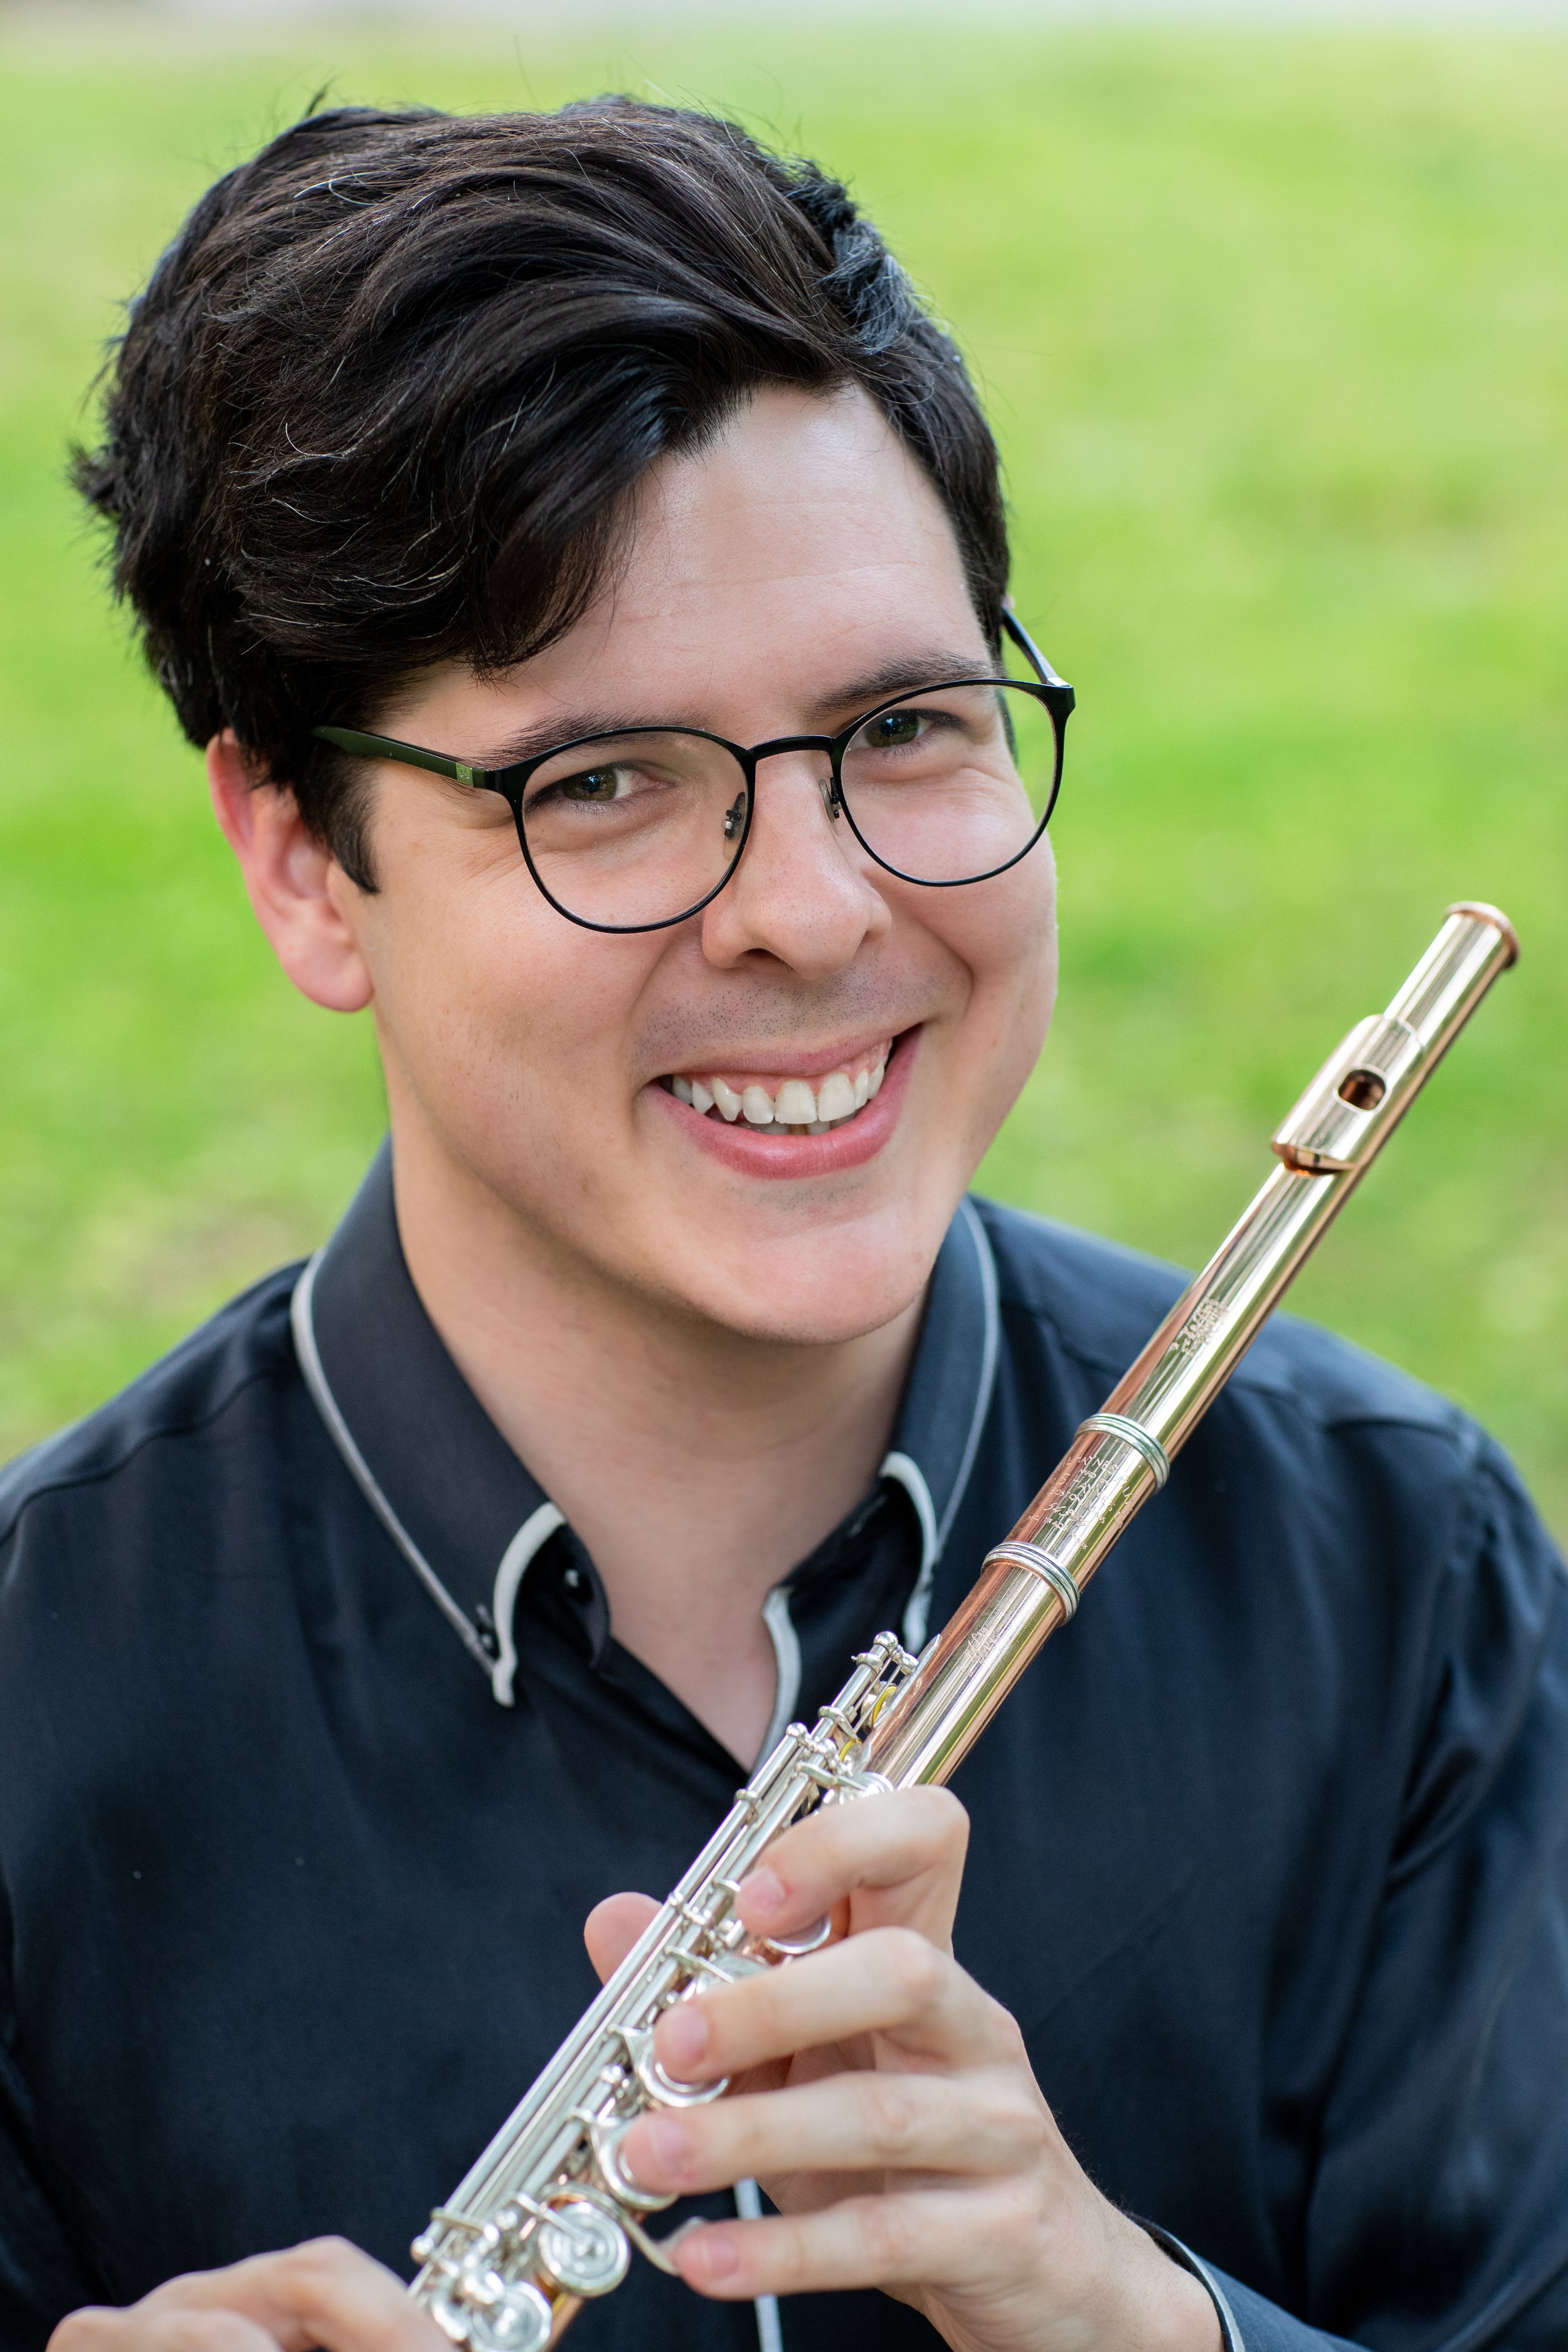 12PM ET "Can you learn a piece without practicing it? An examination of mental practice", Matthew Lee